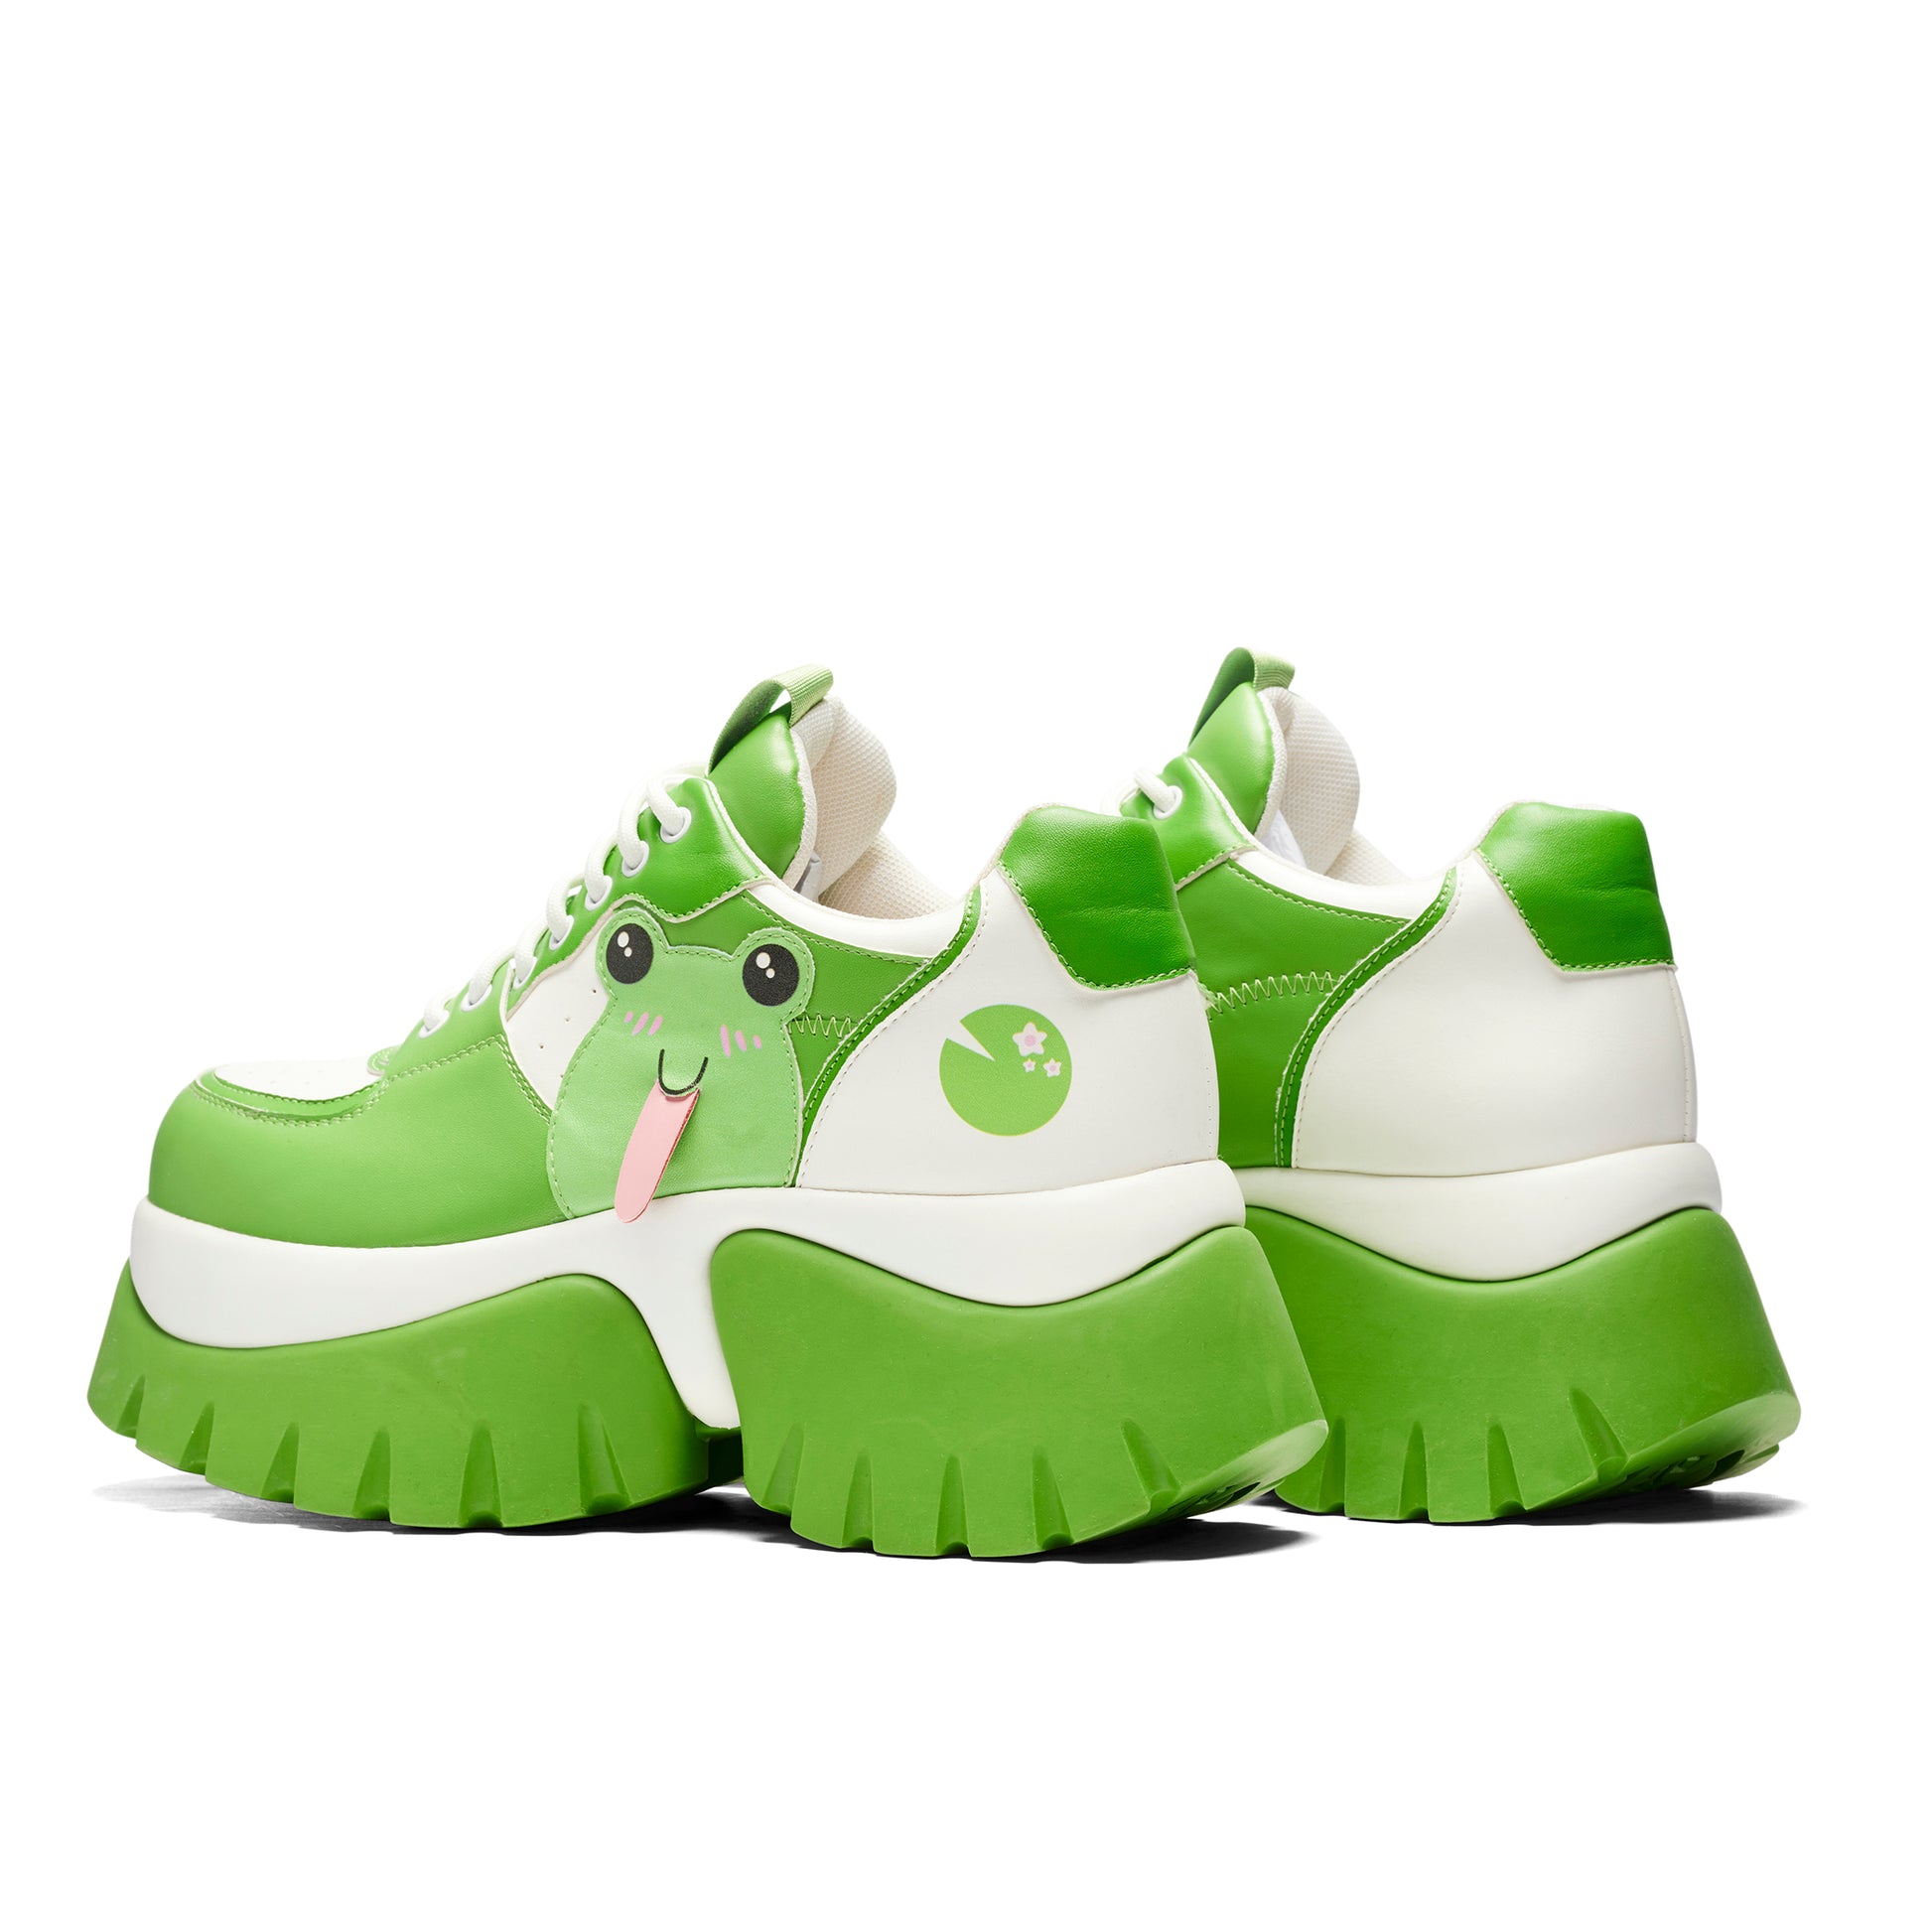 Fwoggy Woggy Says Hi Chunky Trainers - Green - Koi Footwear - Back View